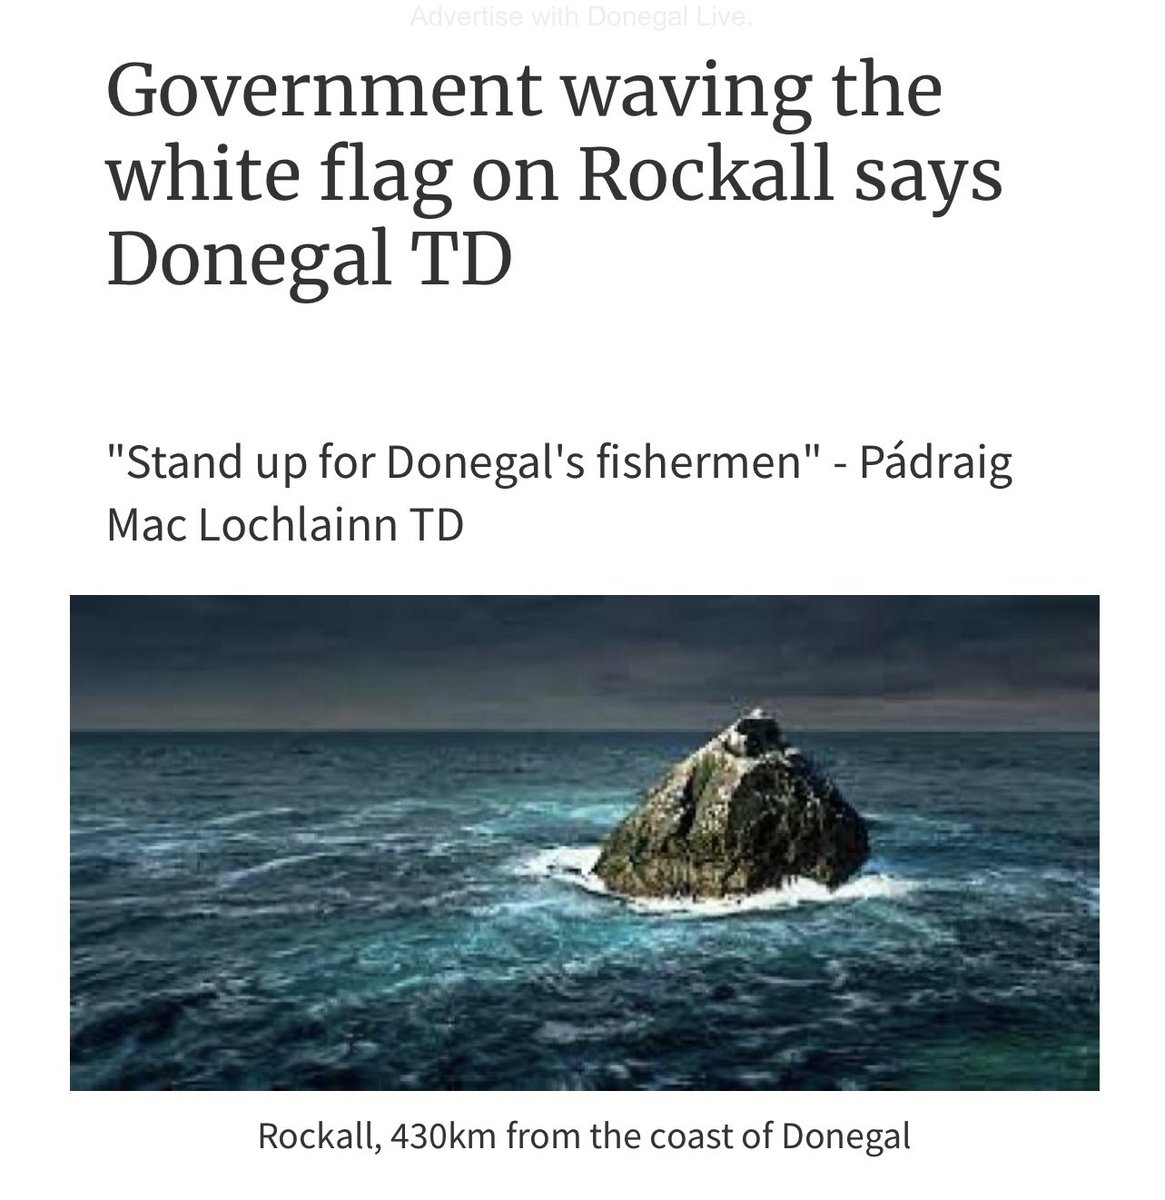 For well over 3 years now, our Irish government have failed to stand up to the British government who have blocked Irish fishermen from their rich traditional grounds around Rockall. The British government have again blocked a deal. How long can this go on?